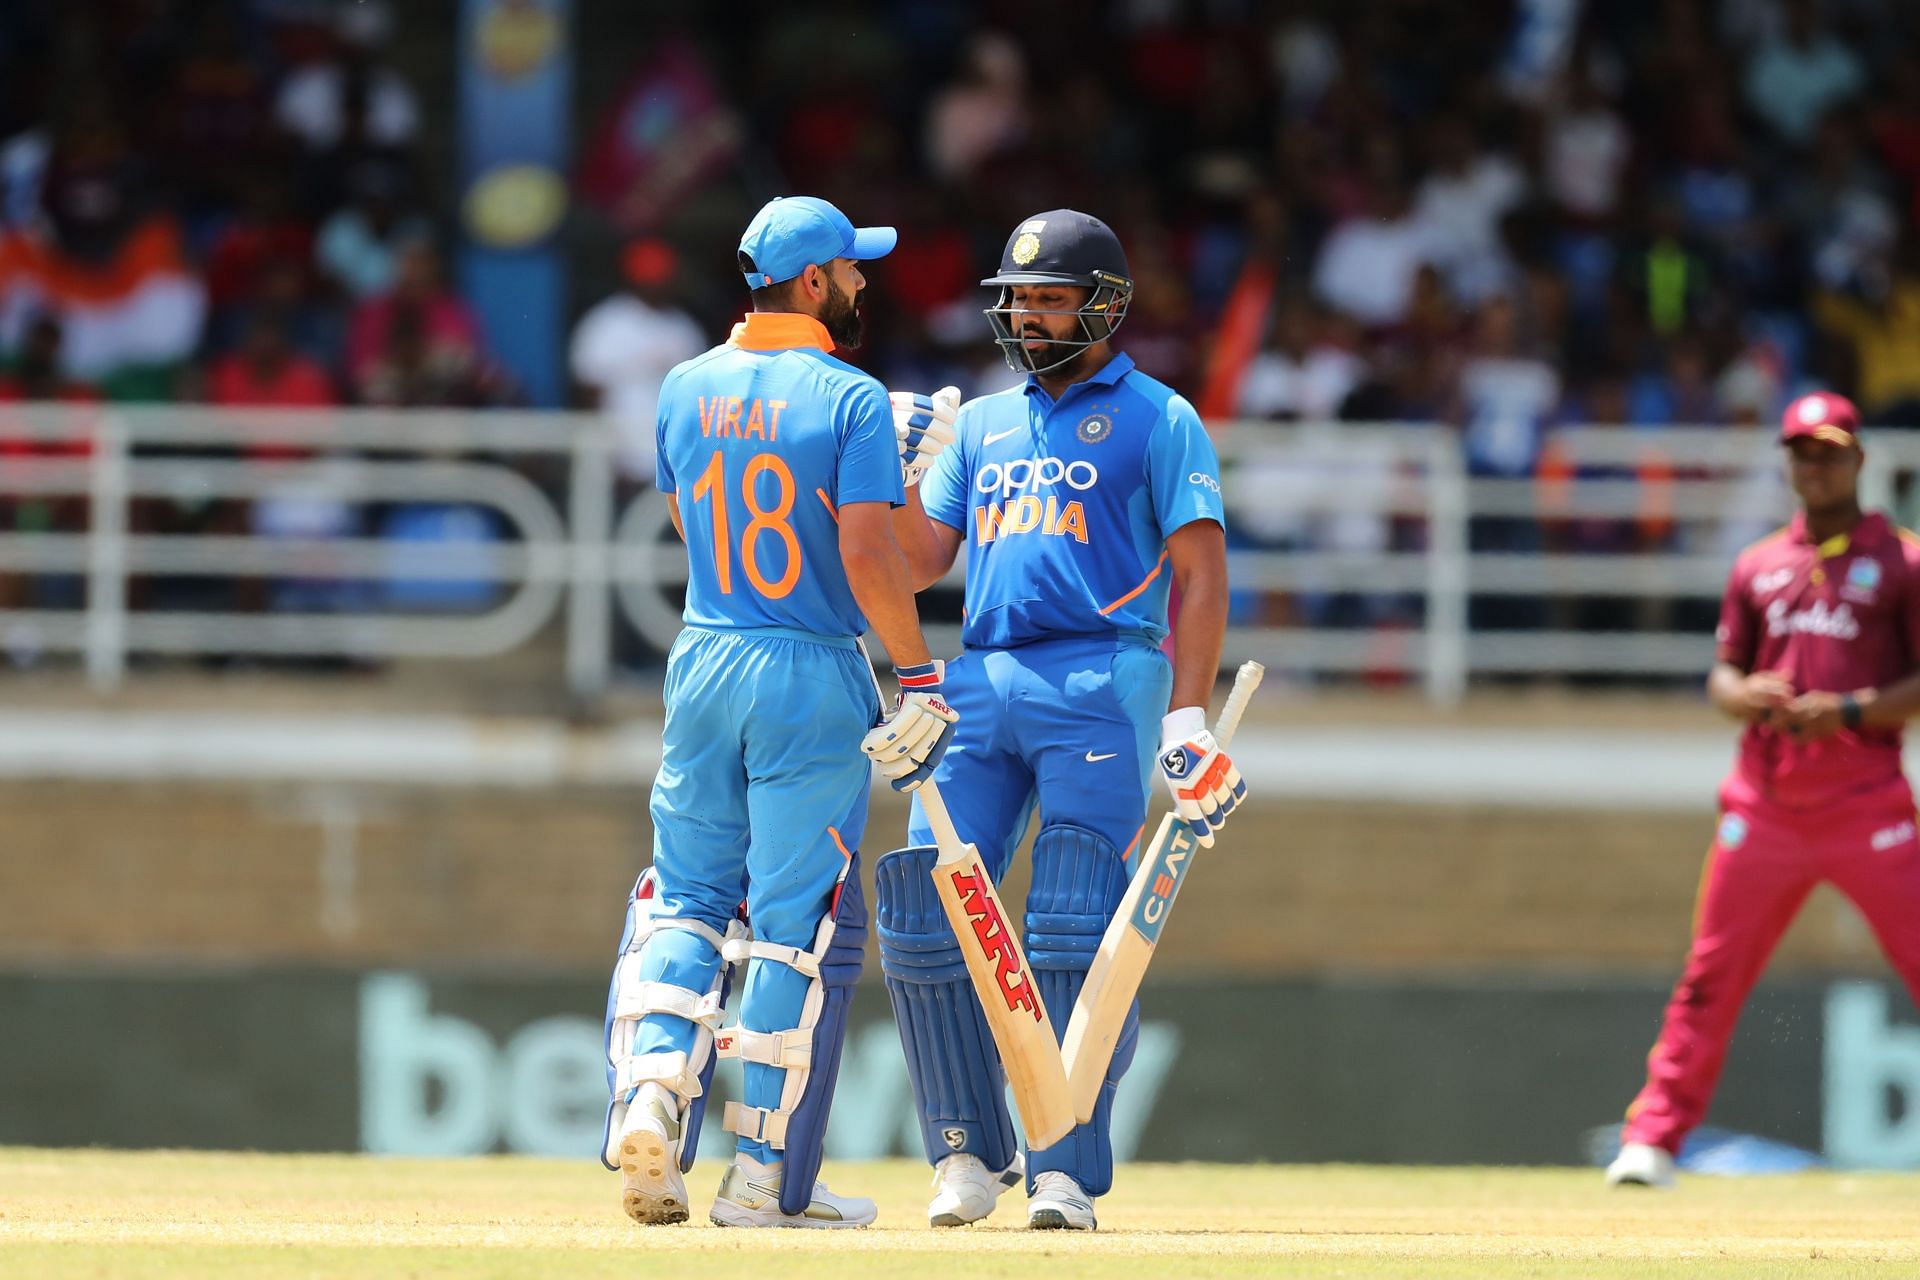 Virat Kohli and Rohit Sharma are two of the best batsmen in modern day cricket